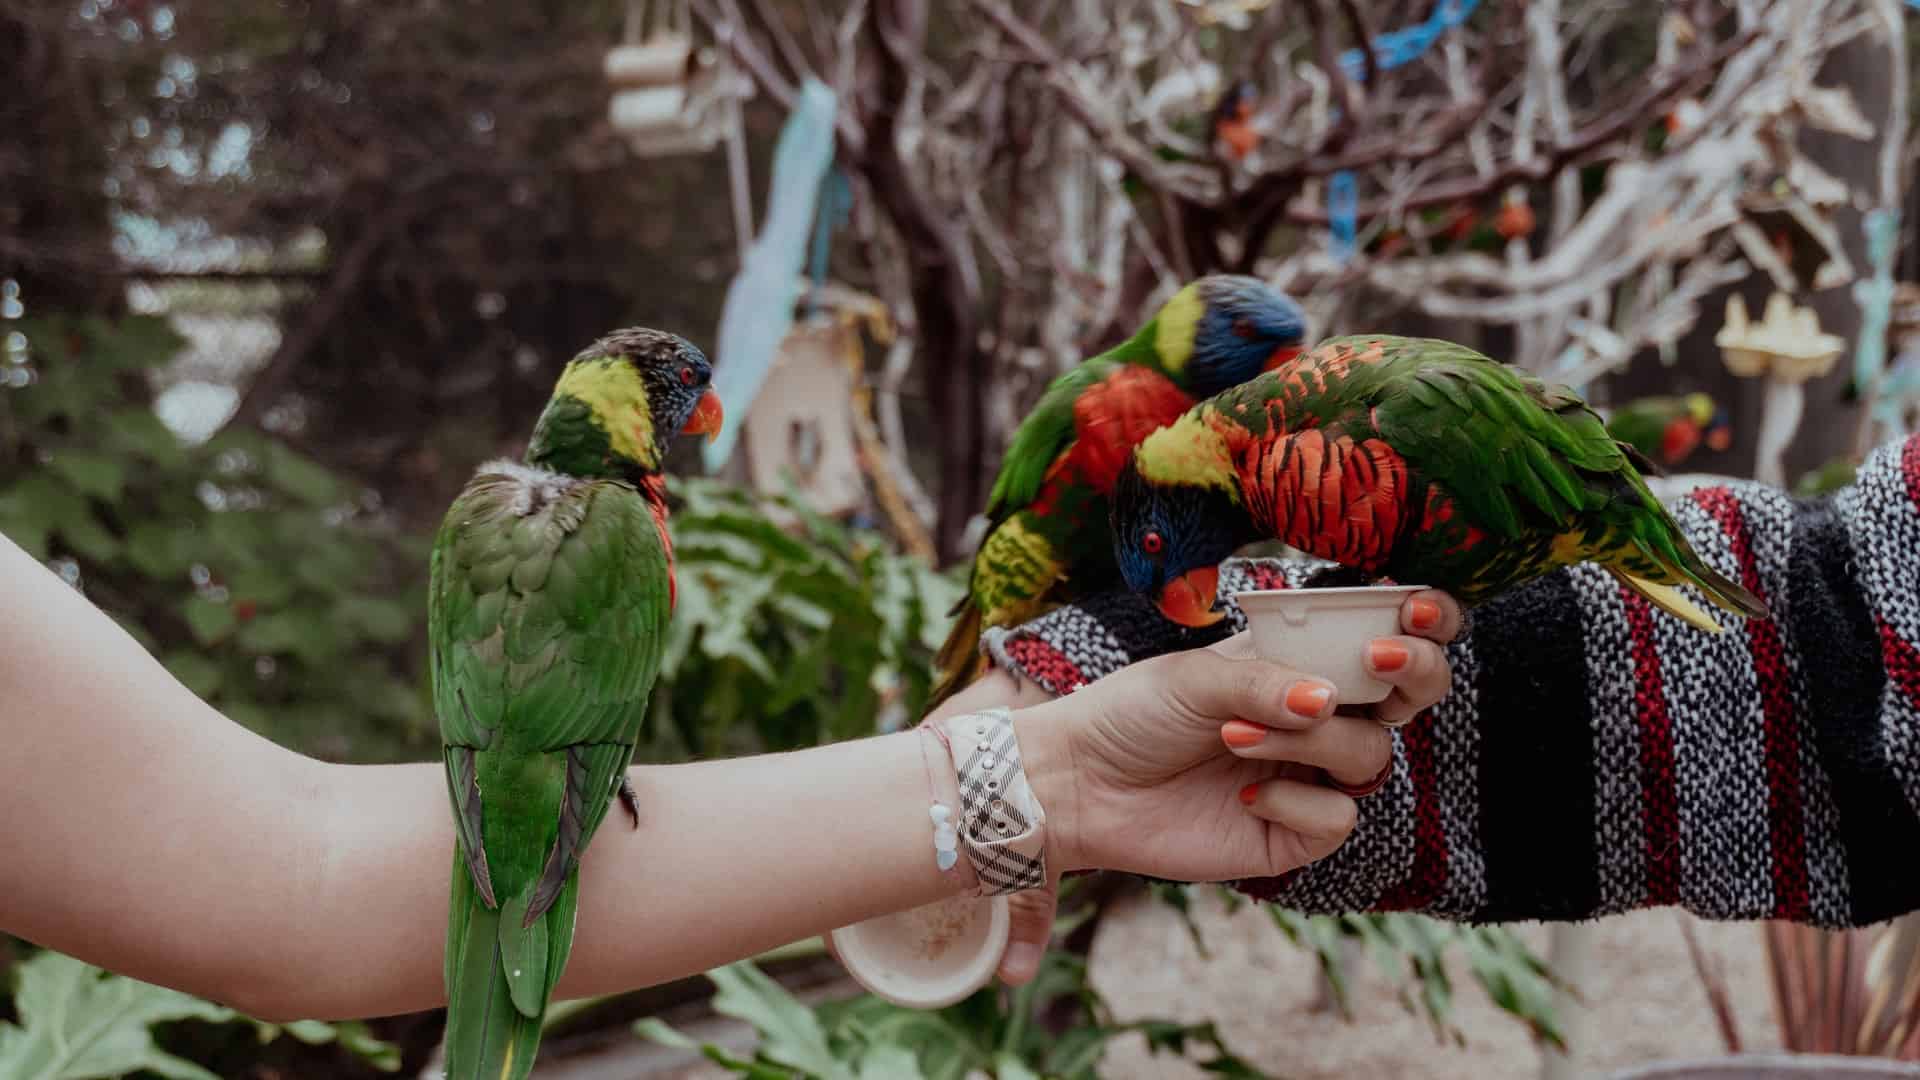 Best things to do in Long Beach California - Chris Browning - Lorikeet feeding at the Aquarium of the Pacific by Vania Medina on Unsplash